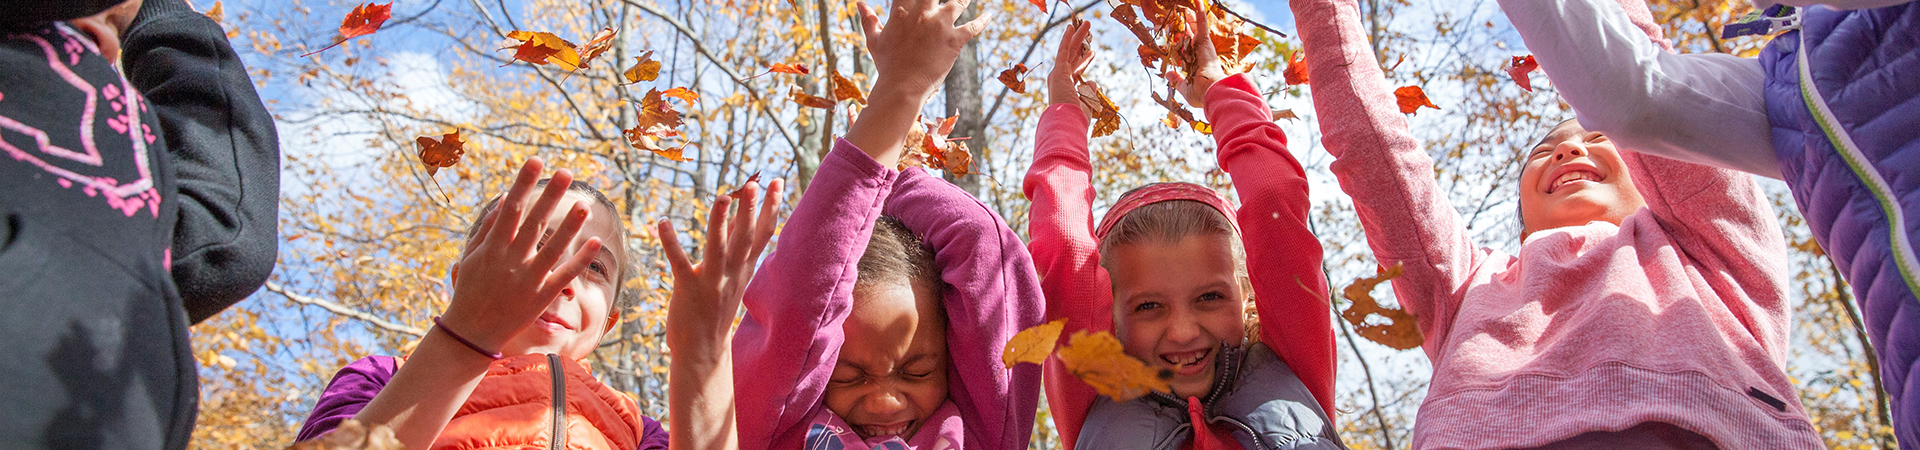  Girl Scouts throwing fall leaves and smiling 